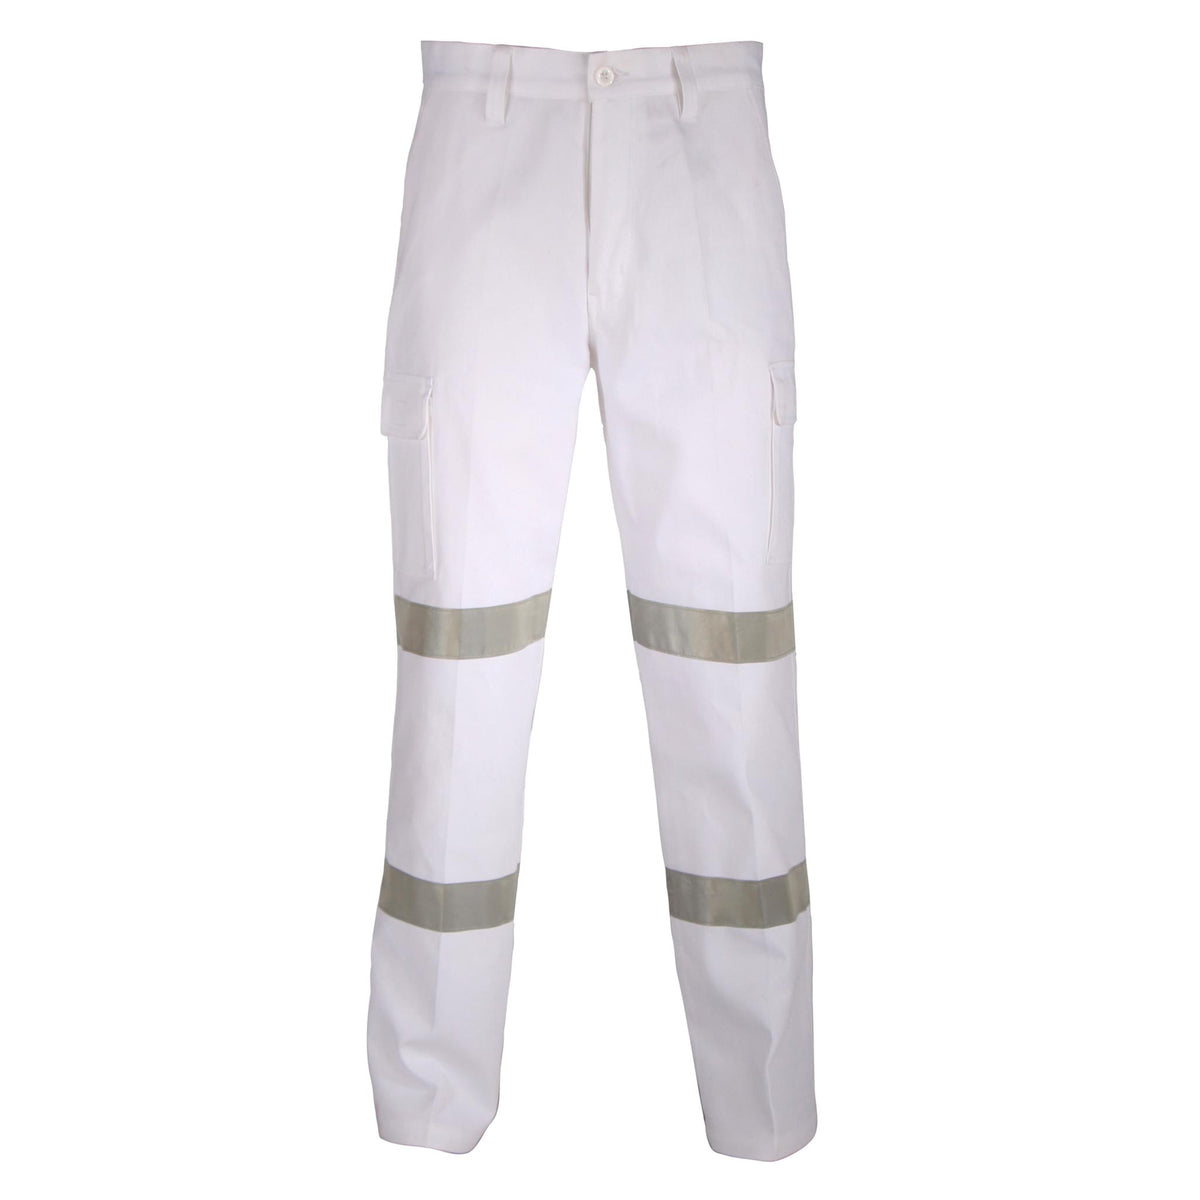 DOUBLE HOOPS TAPED CARGO PANTS - 3361